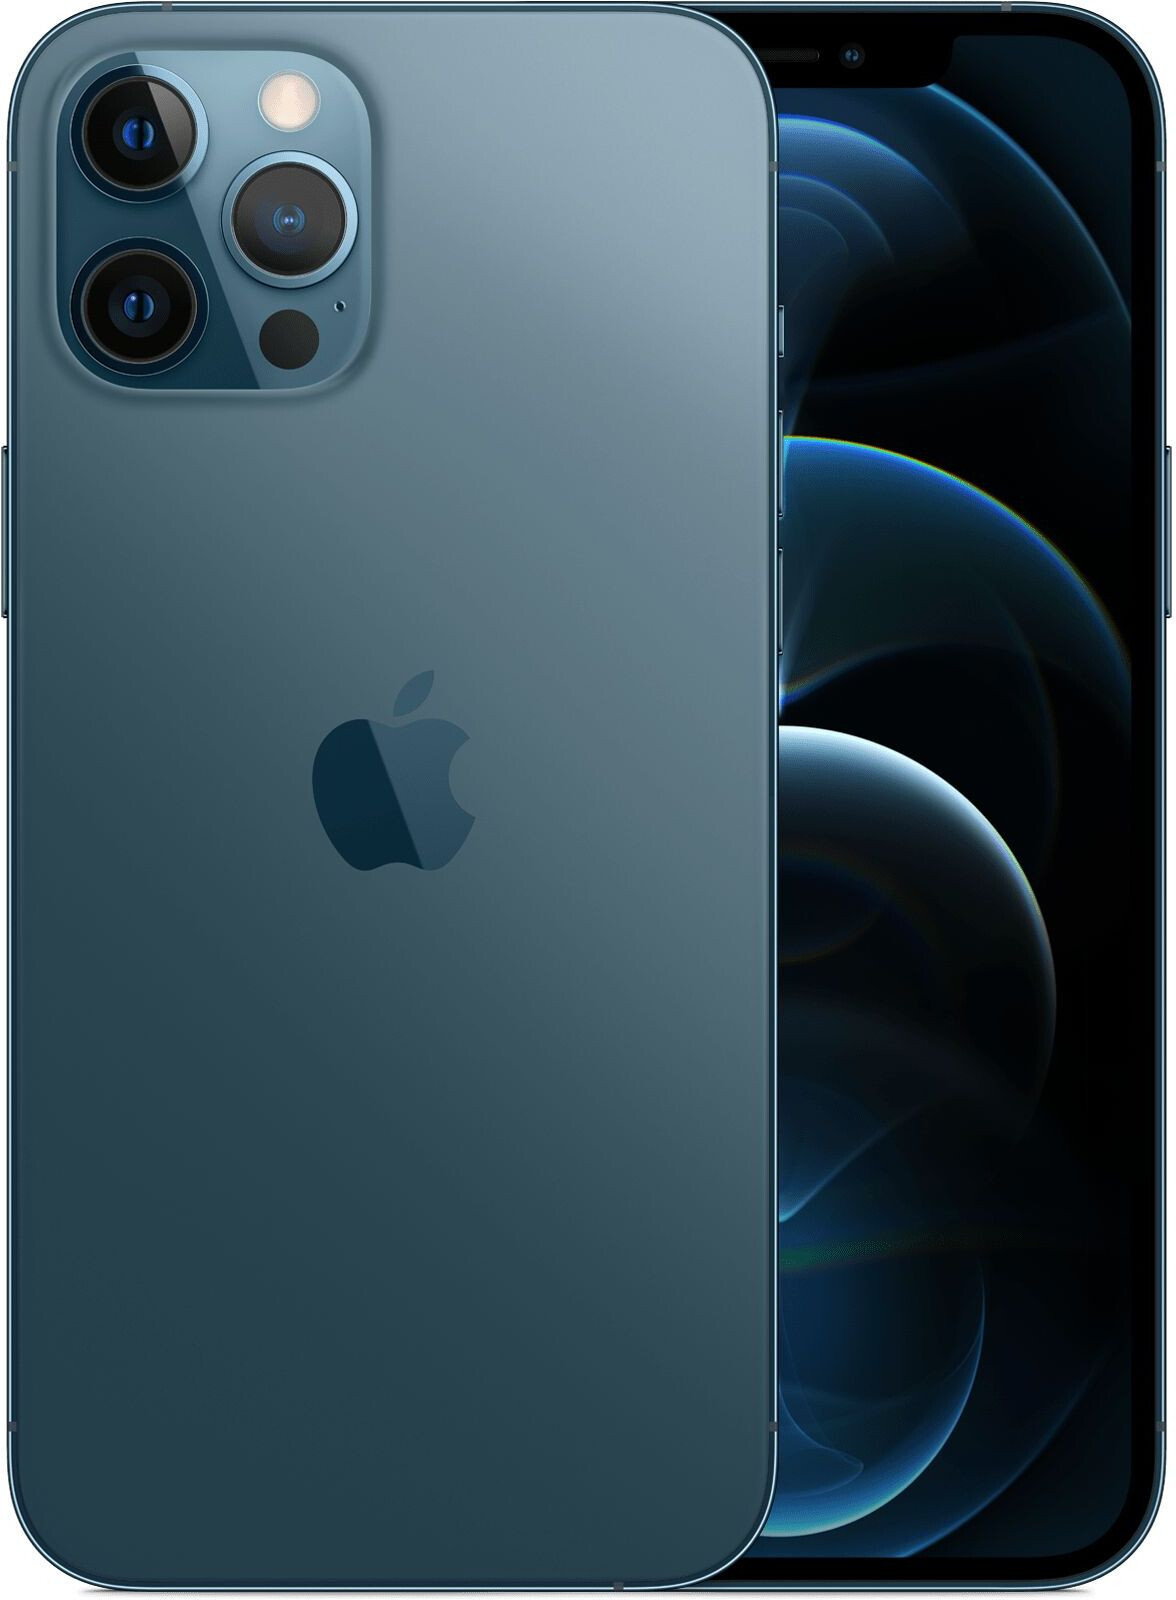 iPhone 12 Pro 128gb, Pacific Blue (MGMN3/MGLR3) 